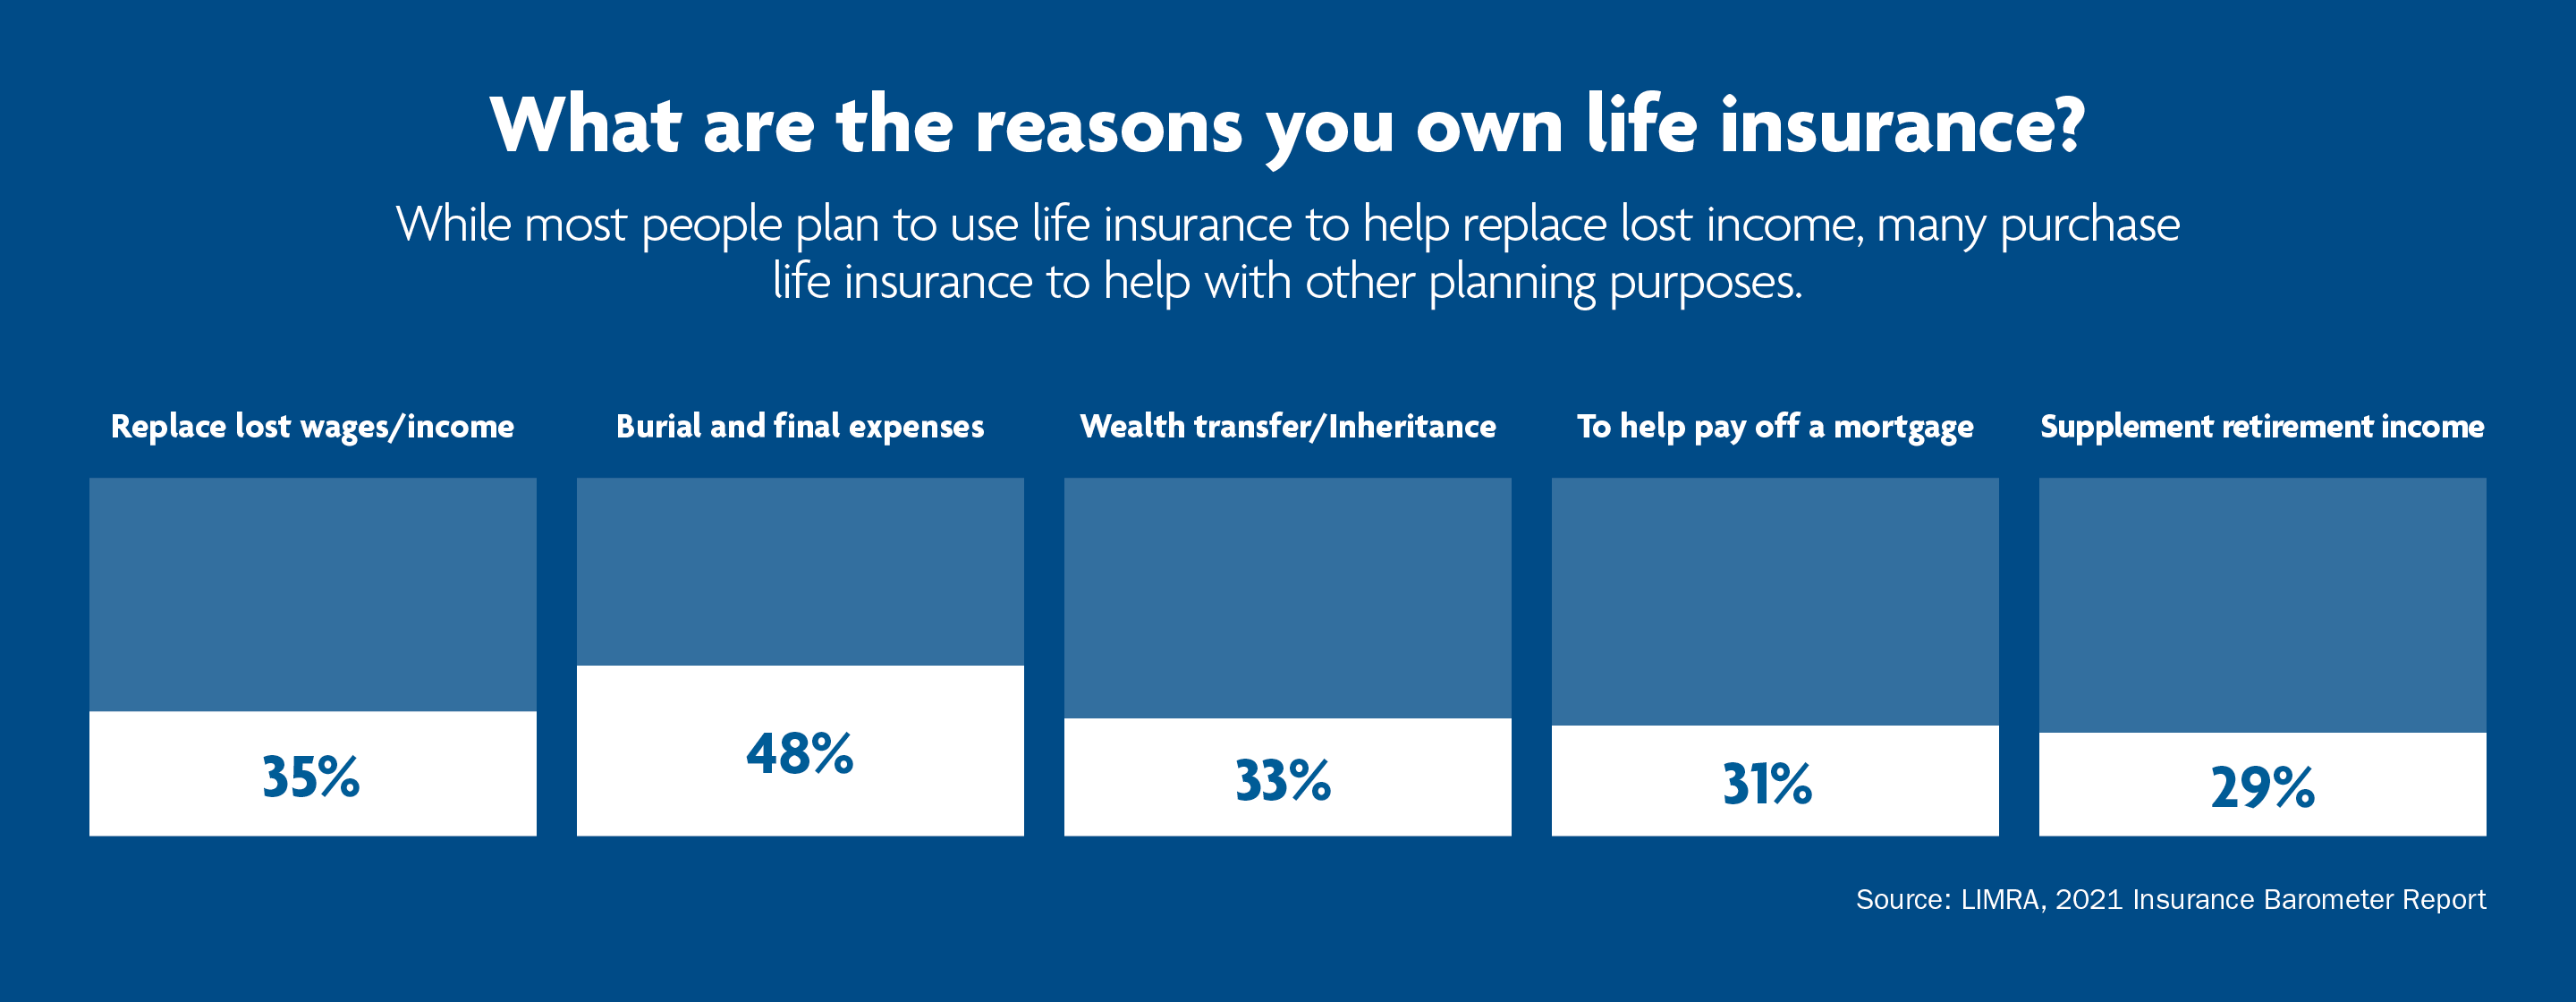 How life insurance can help you find balance in retirement